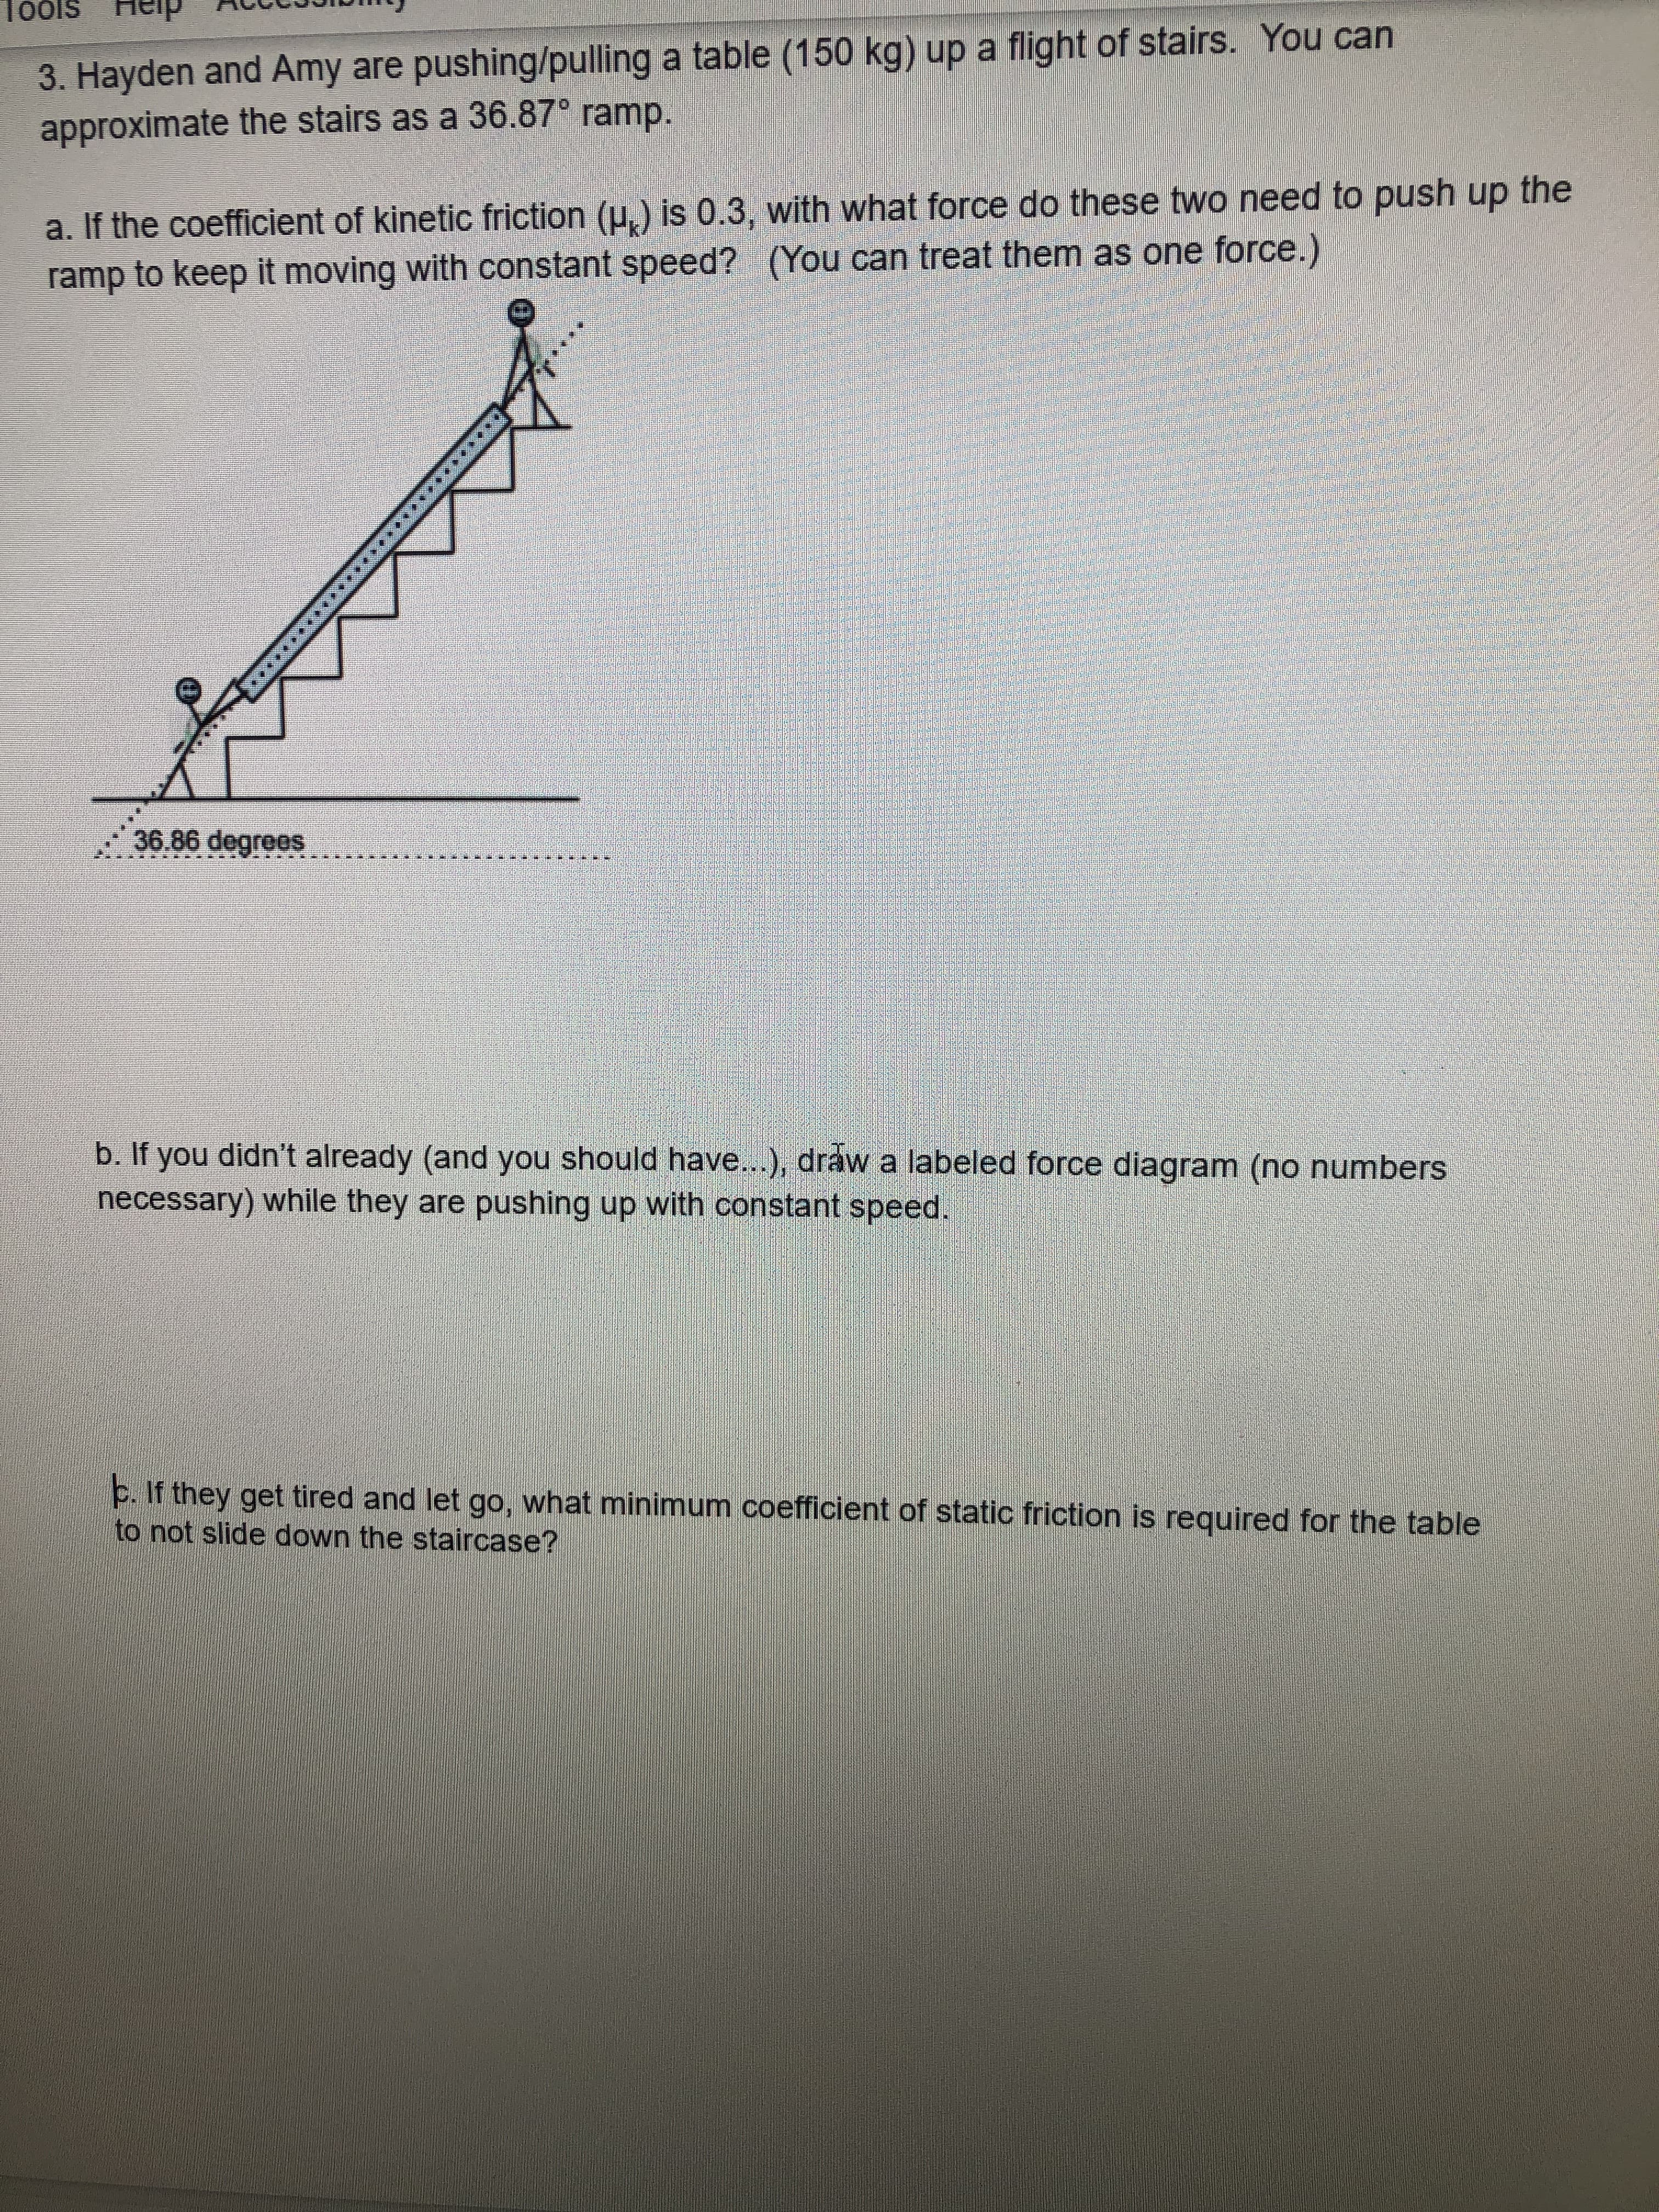 3. Hayden and Amy are pushing/pulling a table (150 kg) up a flight of stairs. You can
approximate the stairs as a 36.87° ramp.
a. If the coefficient of kinetic friction (p.) is 0.3, with what force do these two need to push up the
ramp to keep it moving with constant speed? (You can treat them as one force.)
